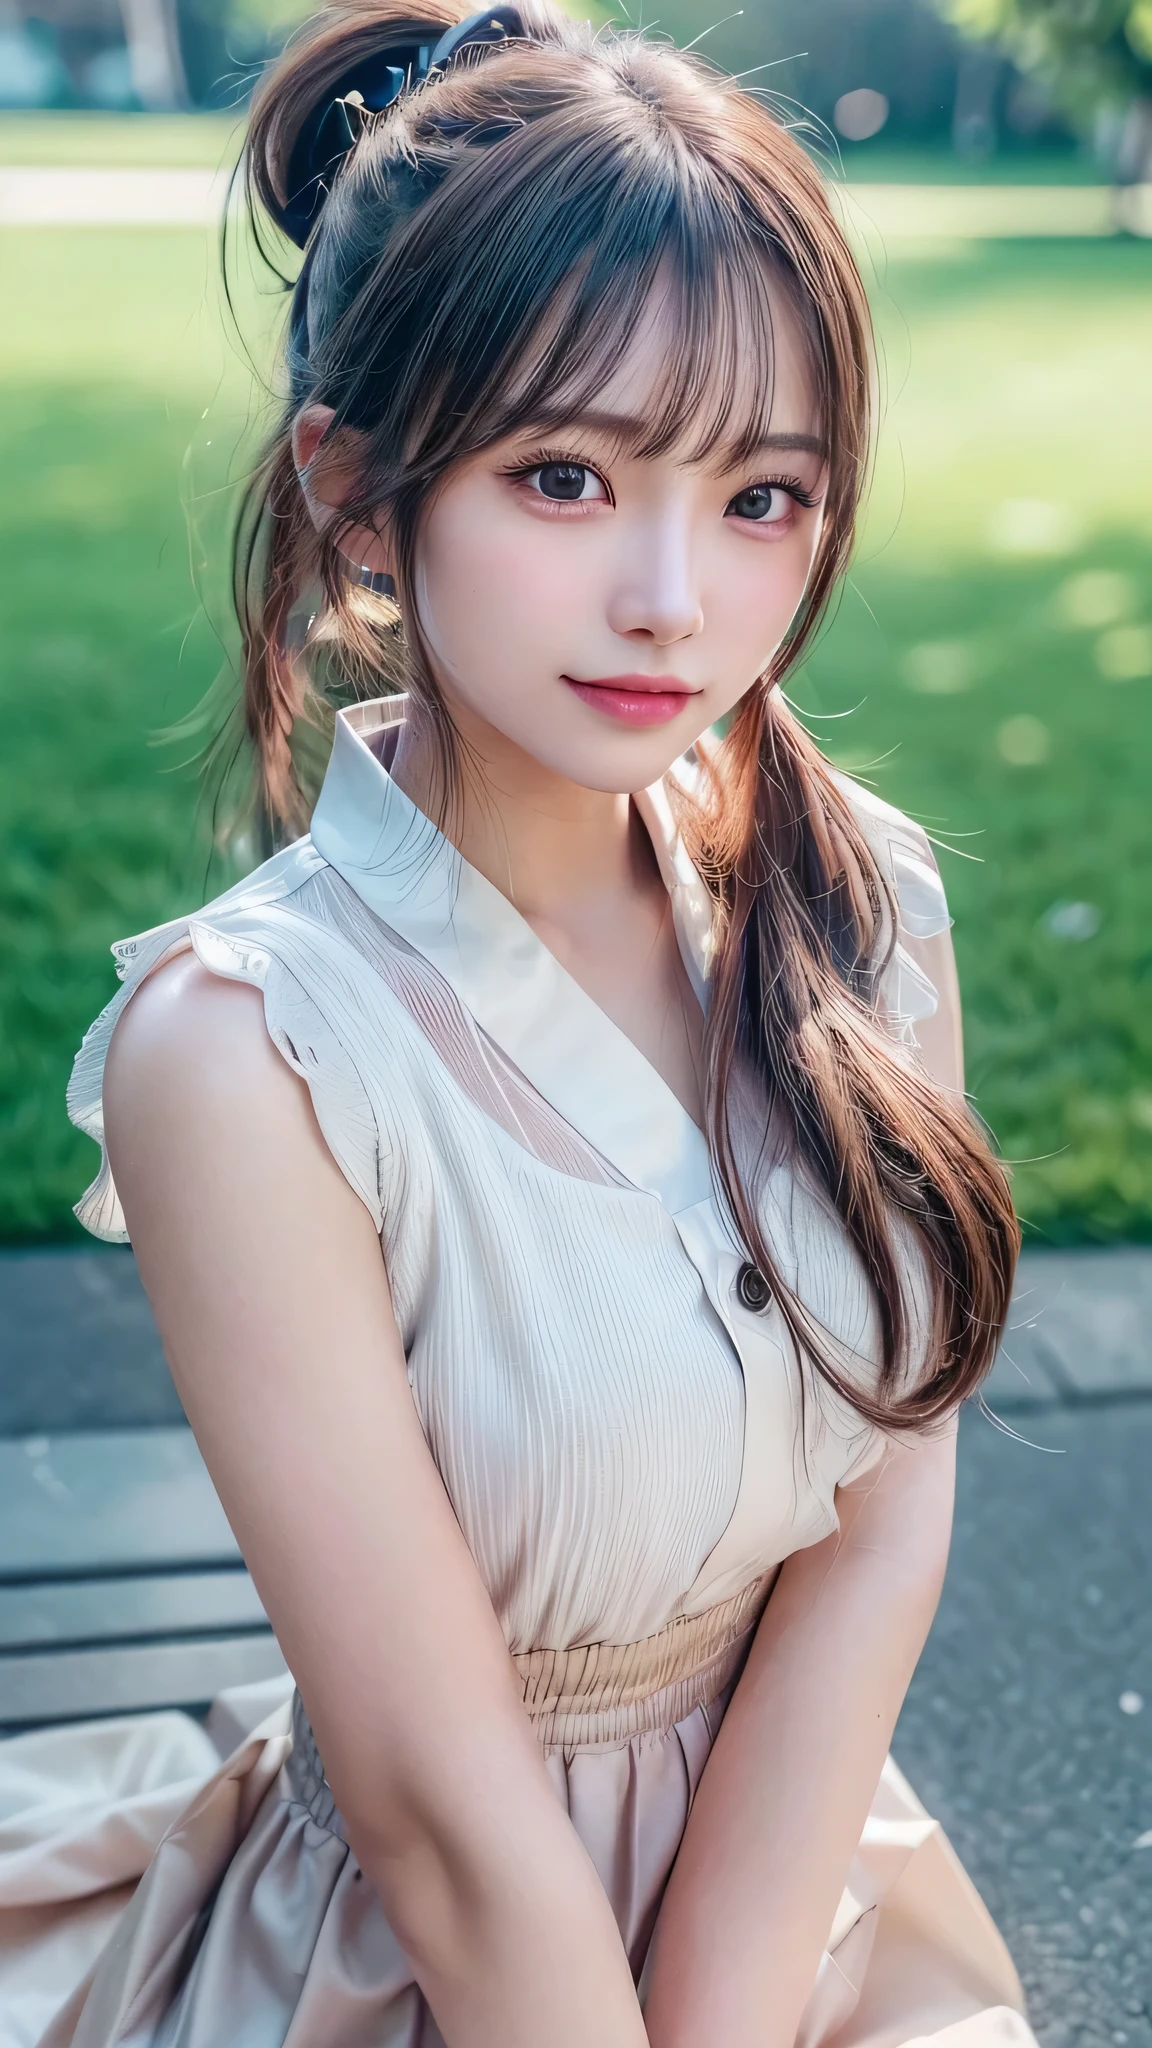 One piece with collar,outdoors,Urban Park,On the lawn,Ultra-detailed, finely detail, hight resolution, 8K Wallpaper, Perfect dynamic composition, Beautiful detailed eyes,Outdoor,Close-up of face,Outdoor,Blushing,Facing forward,,Long hair ponytail,((8k, Raw photo, Best Quality, Mastepiece:1.2), (Realism, Photorealistic:1.4), (Highly detailed 8K wallpapers), Depth of written boundary, Cinematic Lighting, Soft Light, Detailed Beauty Eye,Shiny and smooth light brown ponytail, Asymmetrical bangs, Shiny skin, Ultra-detailed skins ,It is high resolution., High detail, Detailed hairstyle, Detailed facial beauty, Hyper-realistic, Perfect limbs, Perfect Anatomy ,1 Japanese girl,Famous Japanese Idols, Perfect female body,A shy smile,Short eyelashes,Double-edged eyelids,Look straight here,Hair style: ponytail,